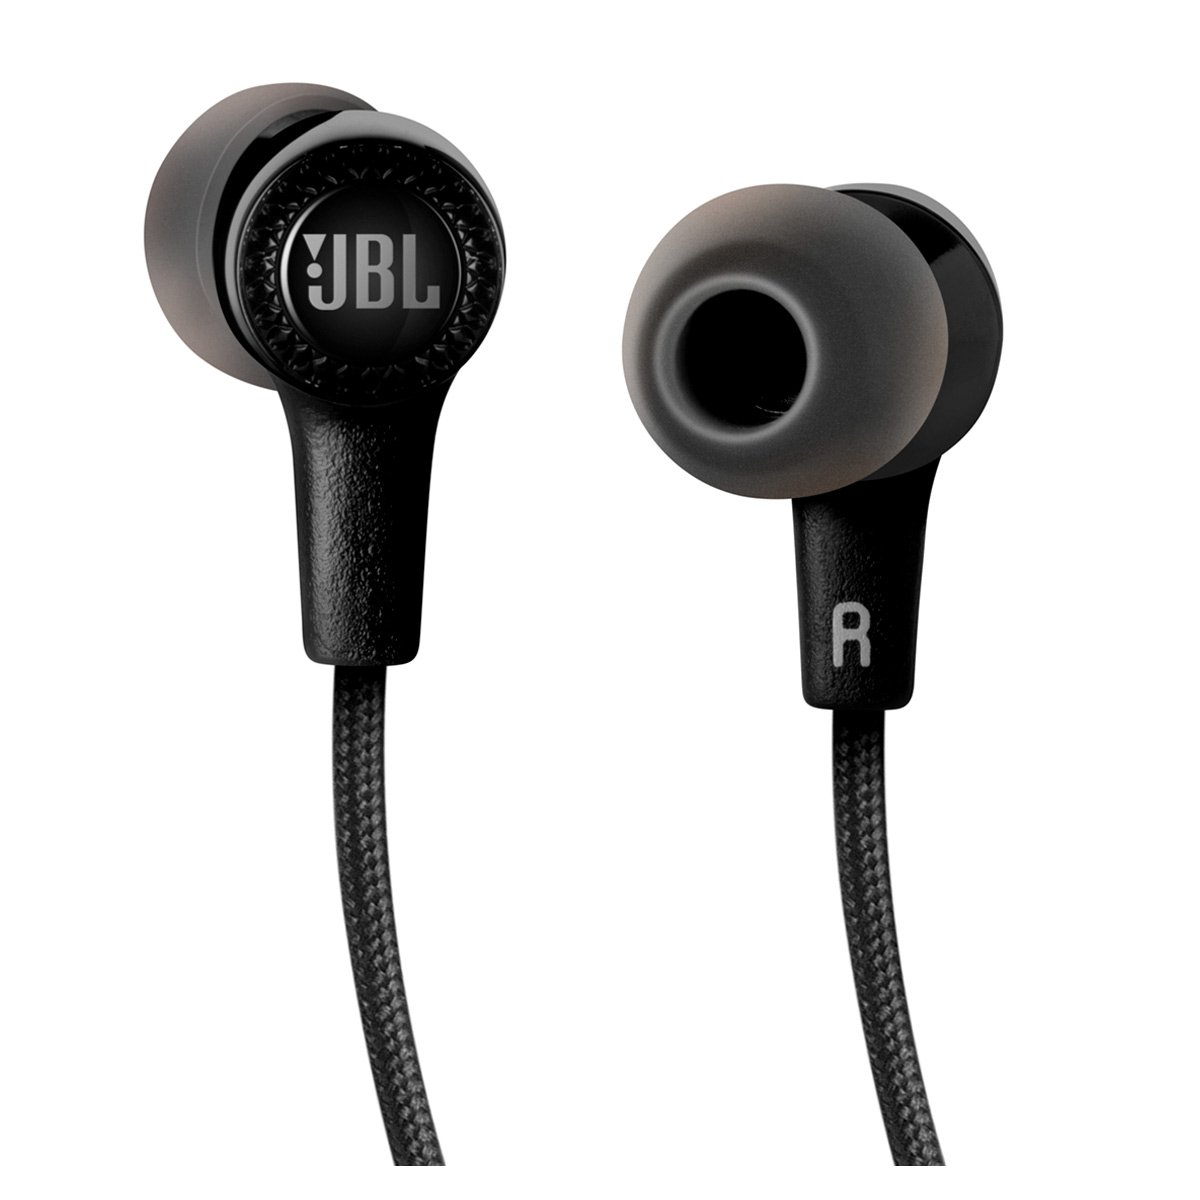 Ensure that the JBL T110BT and the device are within the Bluetooth range.
Move closer to the device or remove any obstacles that may interfere with the signal.